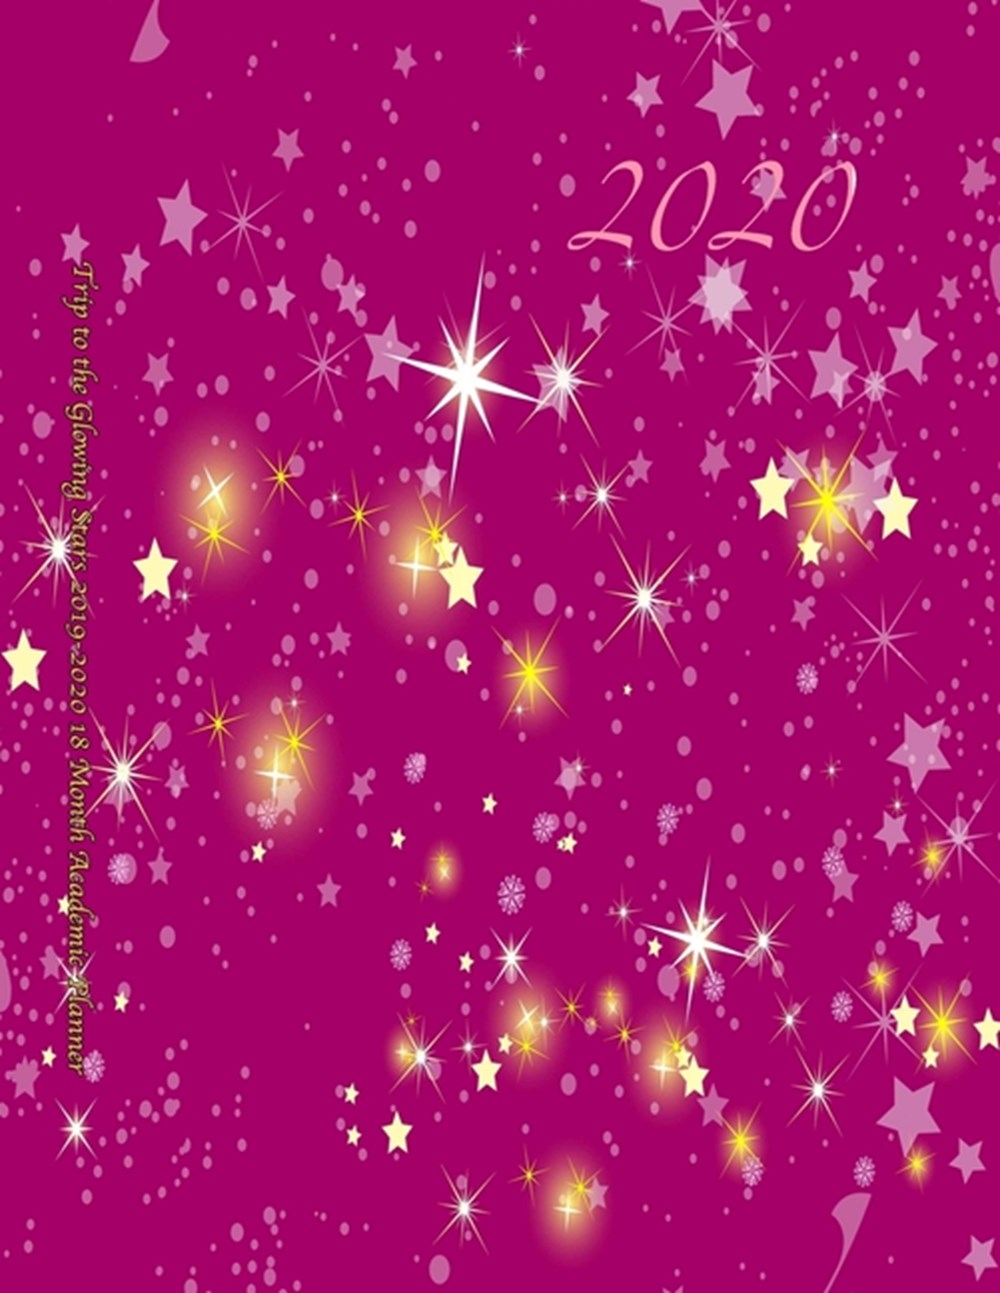 Trip to the Glowing Stars 2019-2020 18 Month Academic Planner July 2019 To December 2020 Calendar Sc